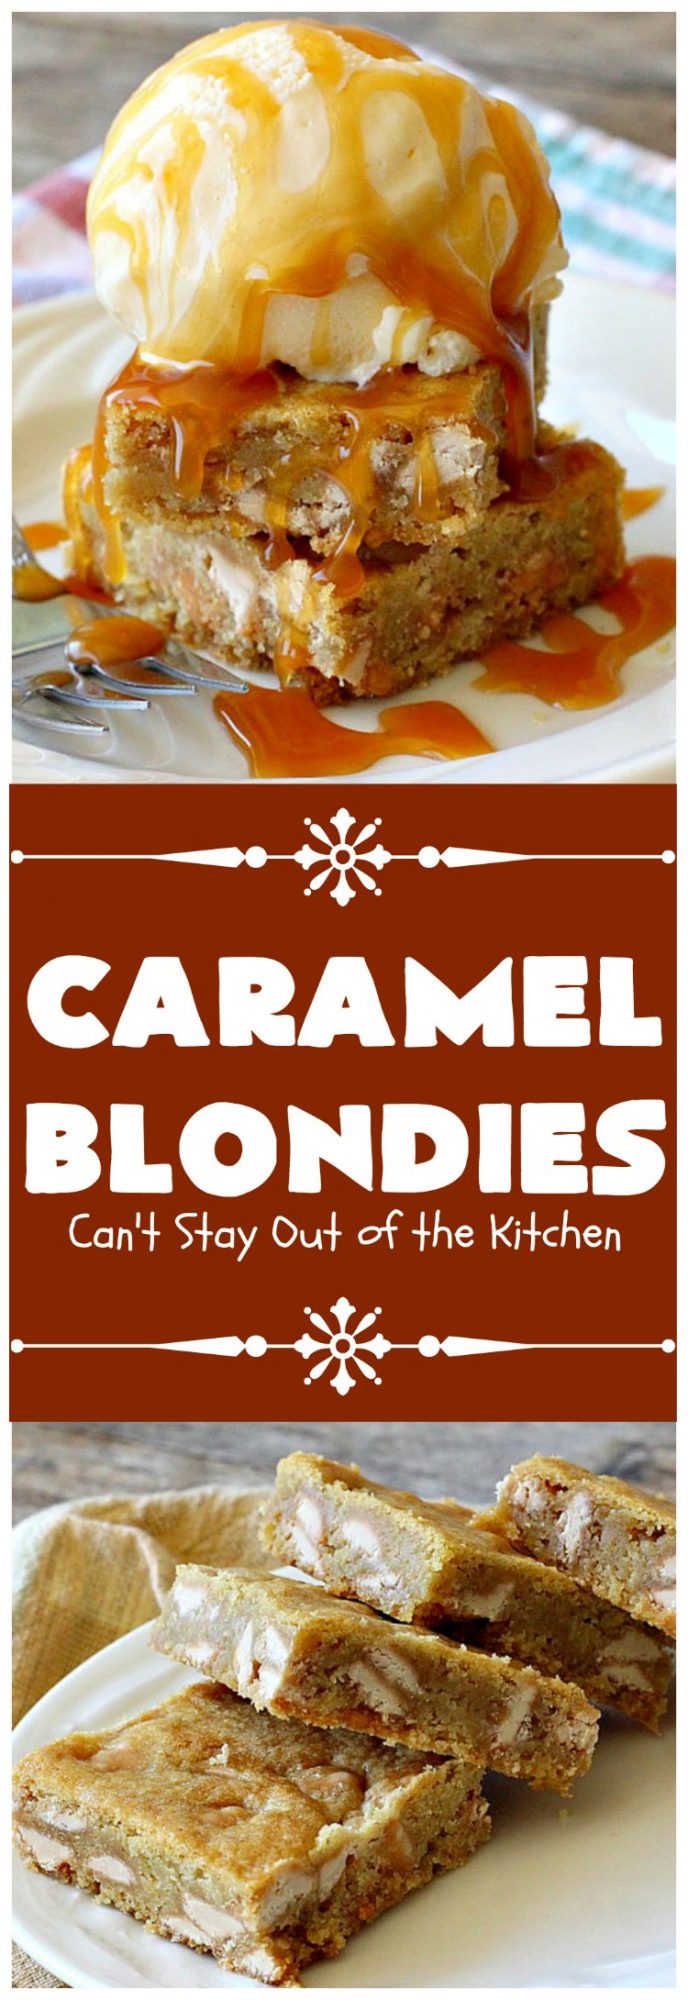 Caramel Blondies – Can't Stay Out of the Kitchen